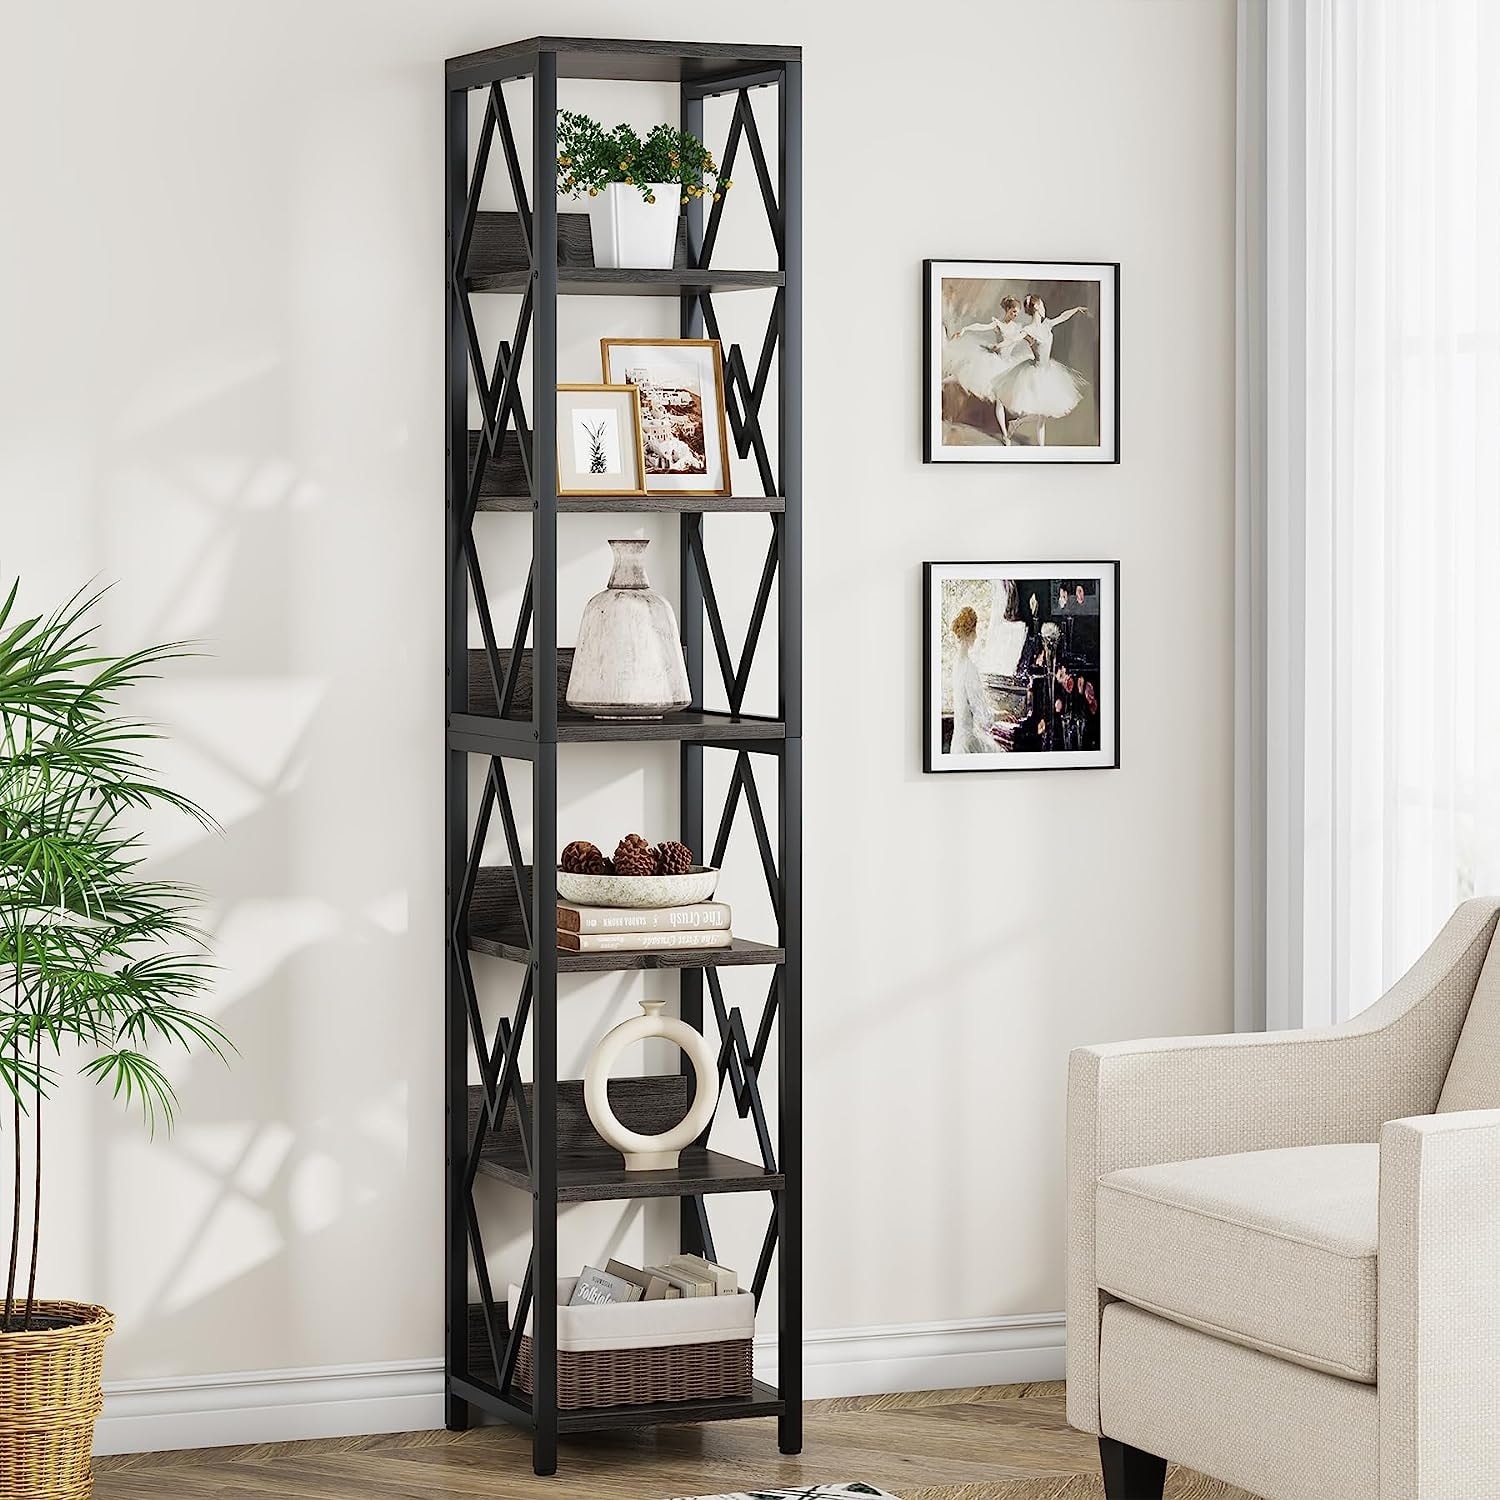 https://ak1.ostkcdn.com/images/products/is/images/direct/267eb728ae83c497913a2e3f8c39e7c093c5d70c/75-Inches-Tall-Narrow-Bookcase-with-Heavy-Duty-Metal-Frame.jpg